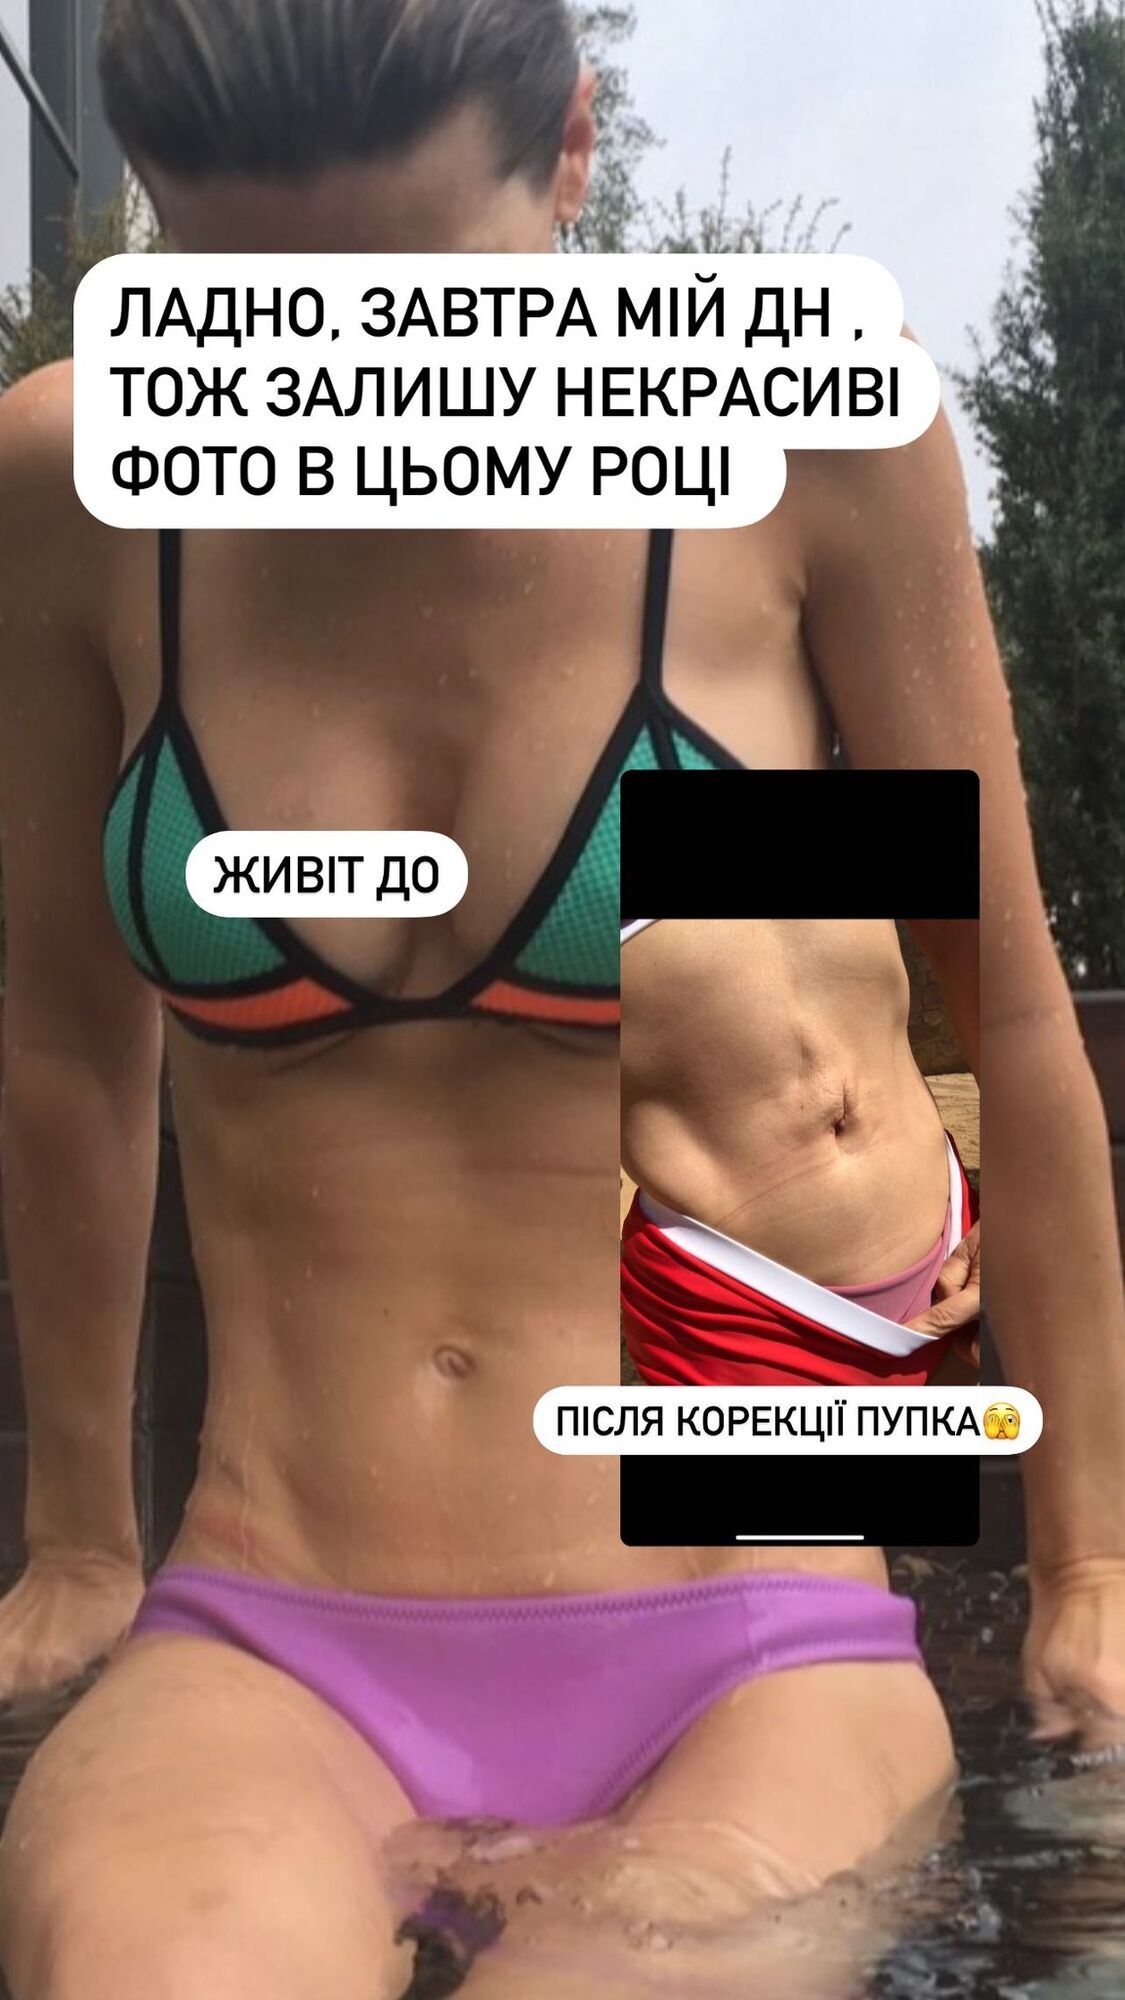 For the first time, Anita Lutsenko showed a photo of how she was disfigured by a surgeon from the top 10 best in Ukraine and explained why she has been hiding her stomach lately